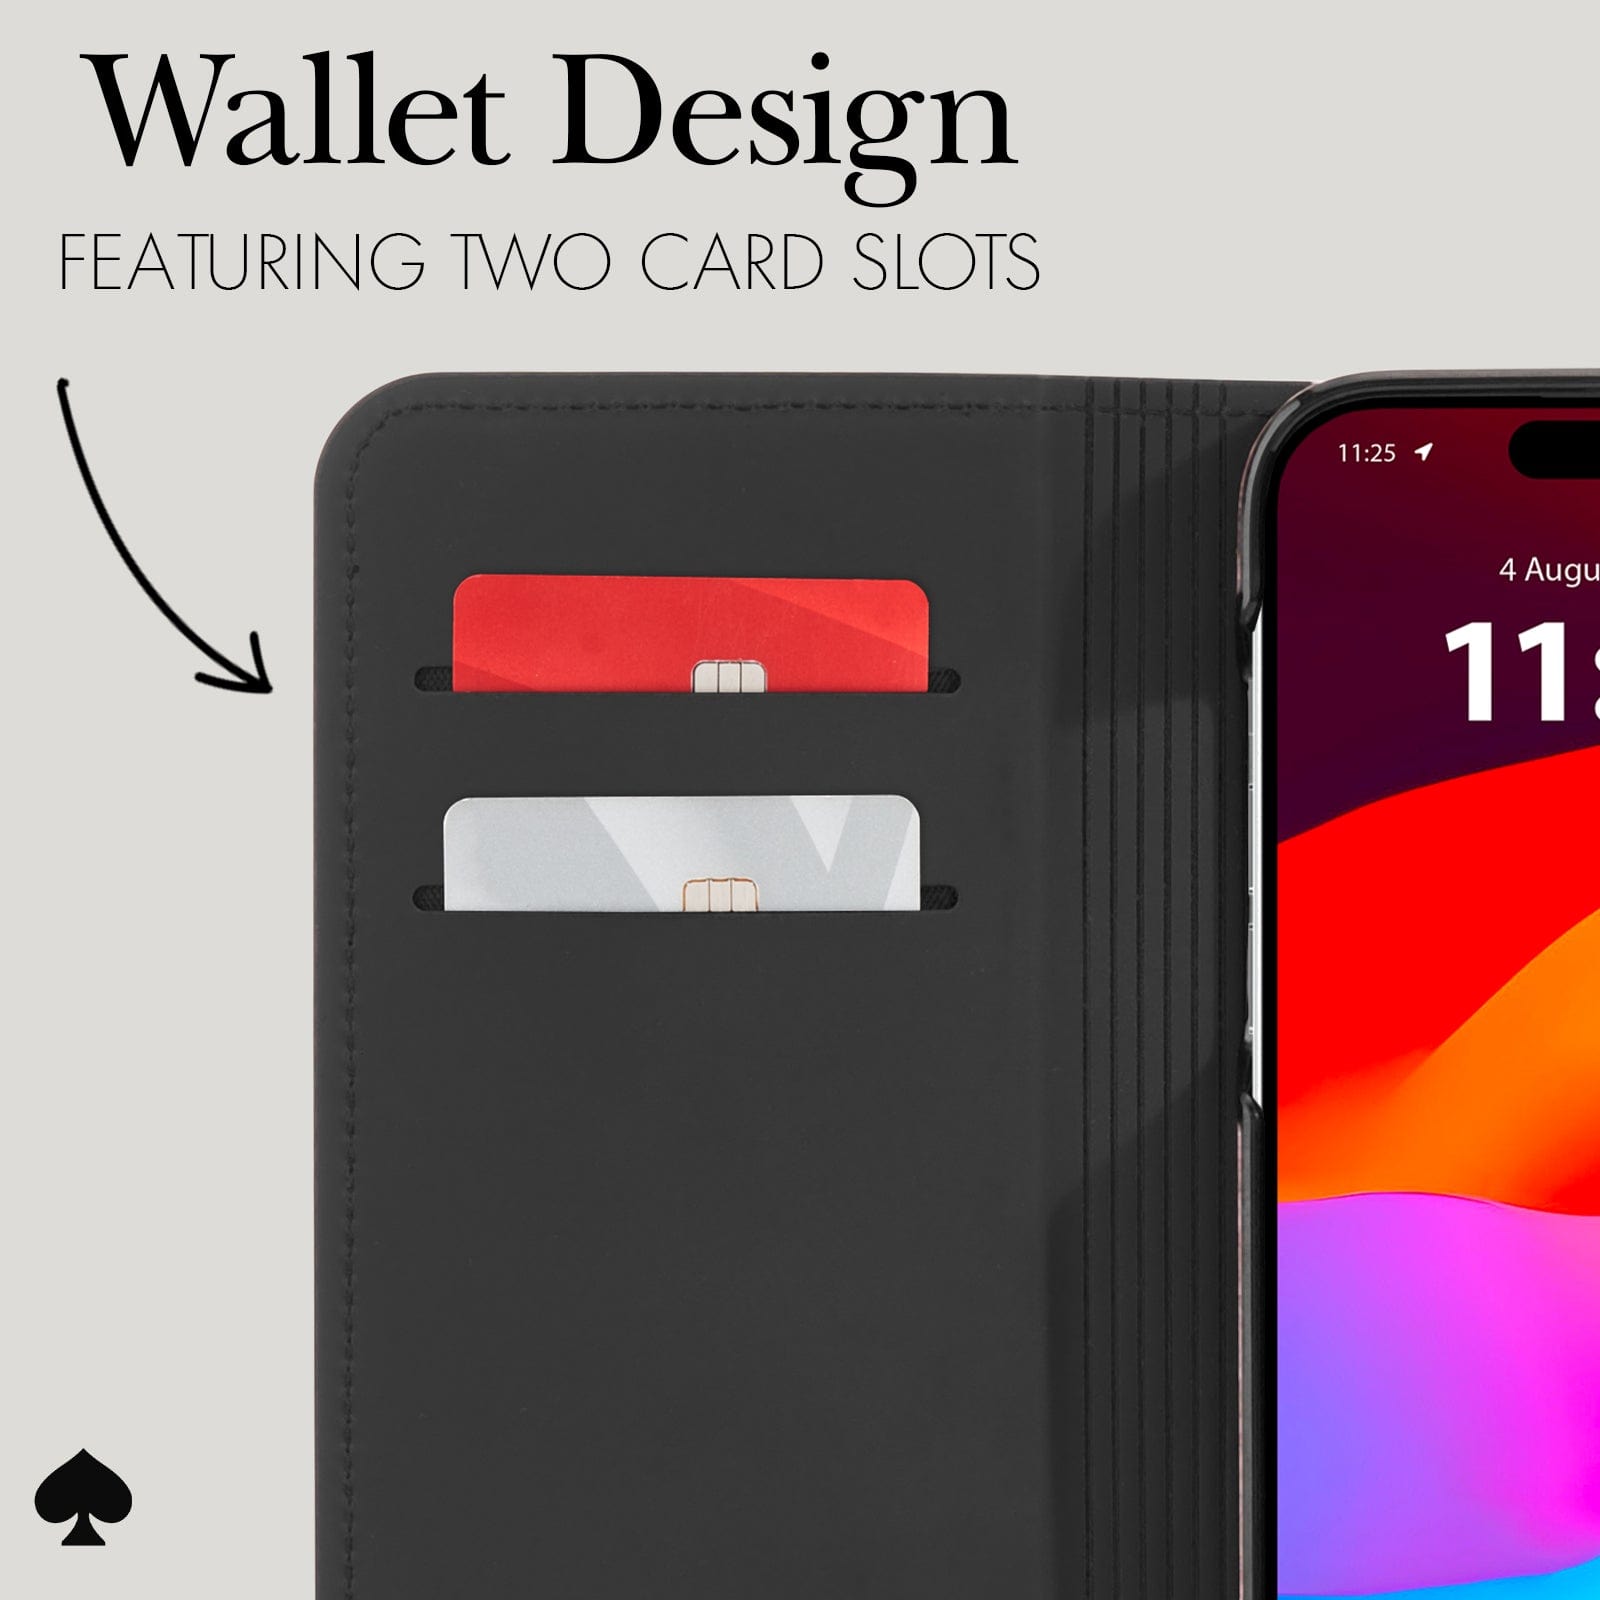 WALLET DESIGN FEATURING 2 CARD SLOTS